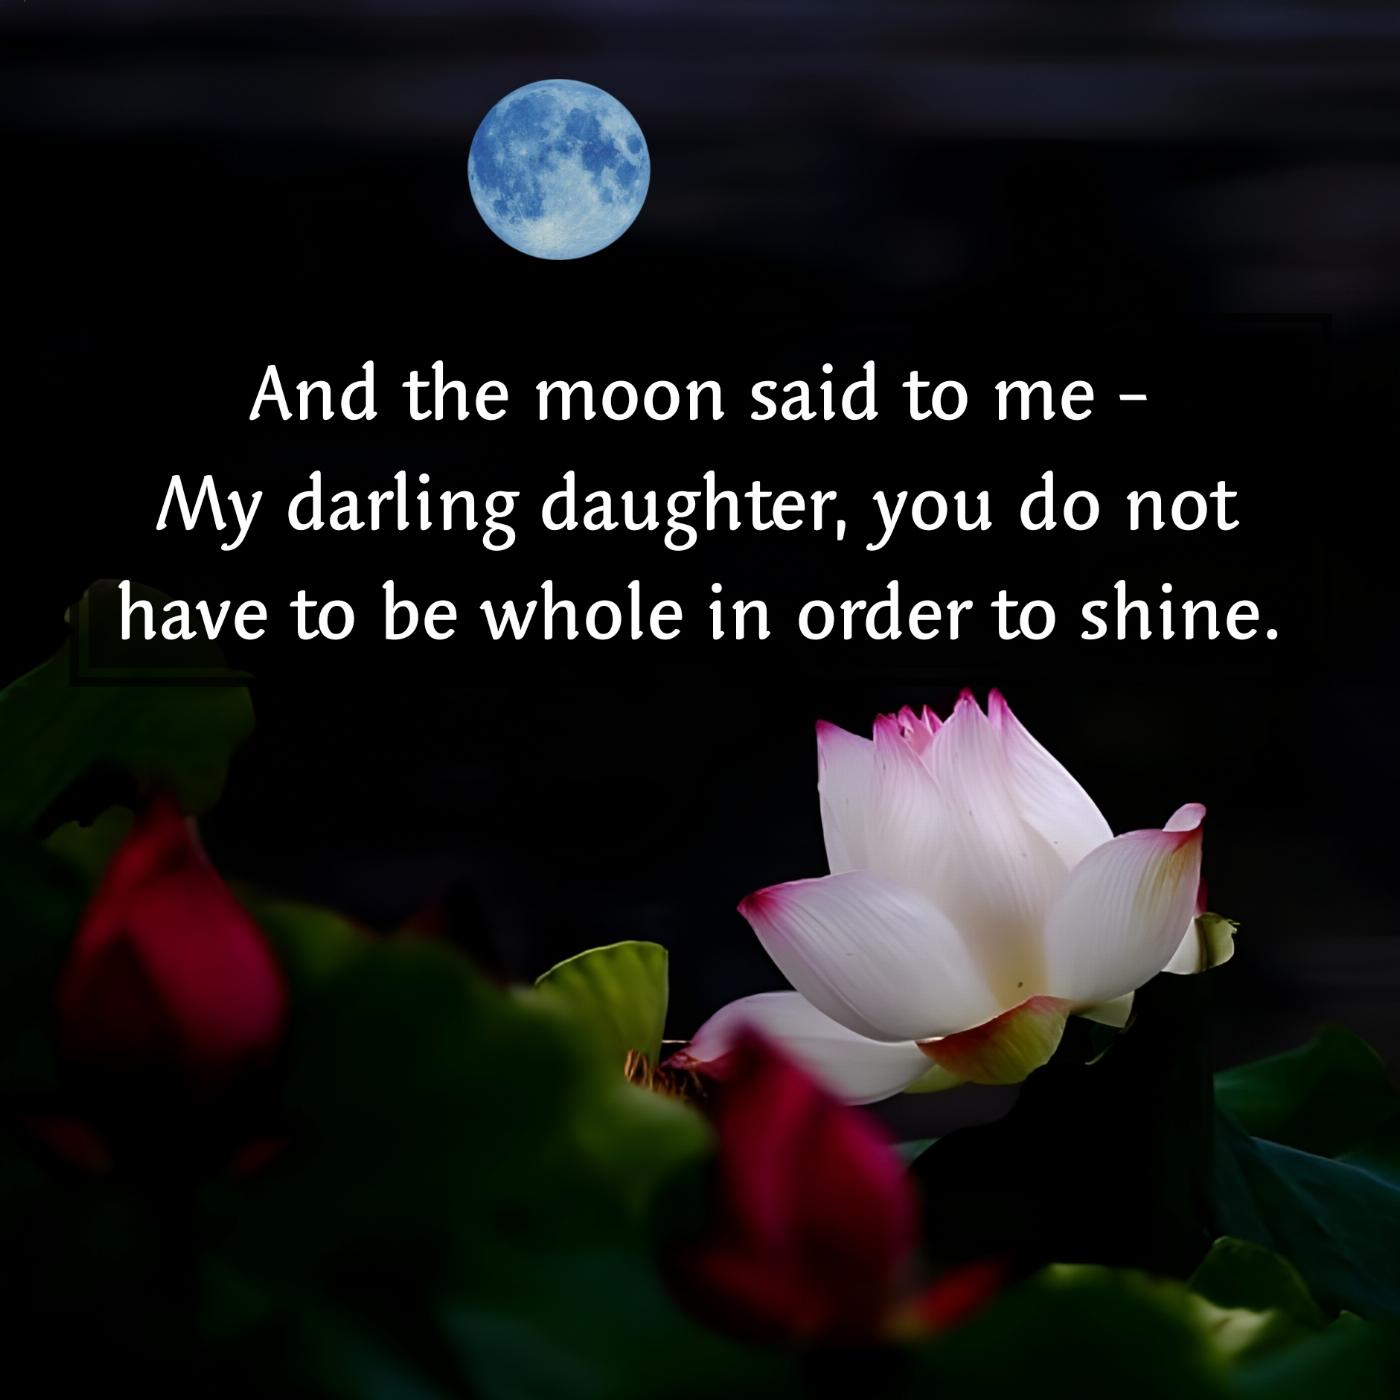 And the moon said to me - My darling daughter